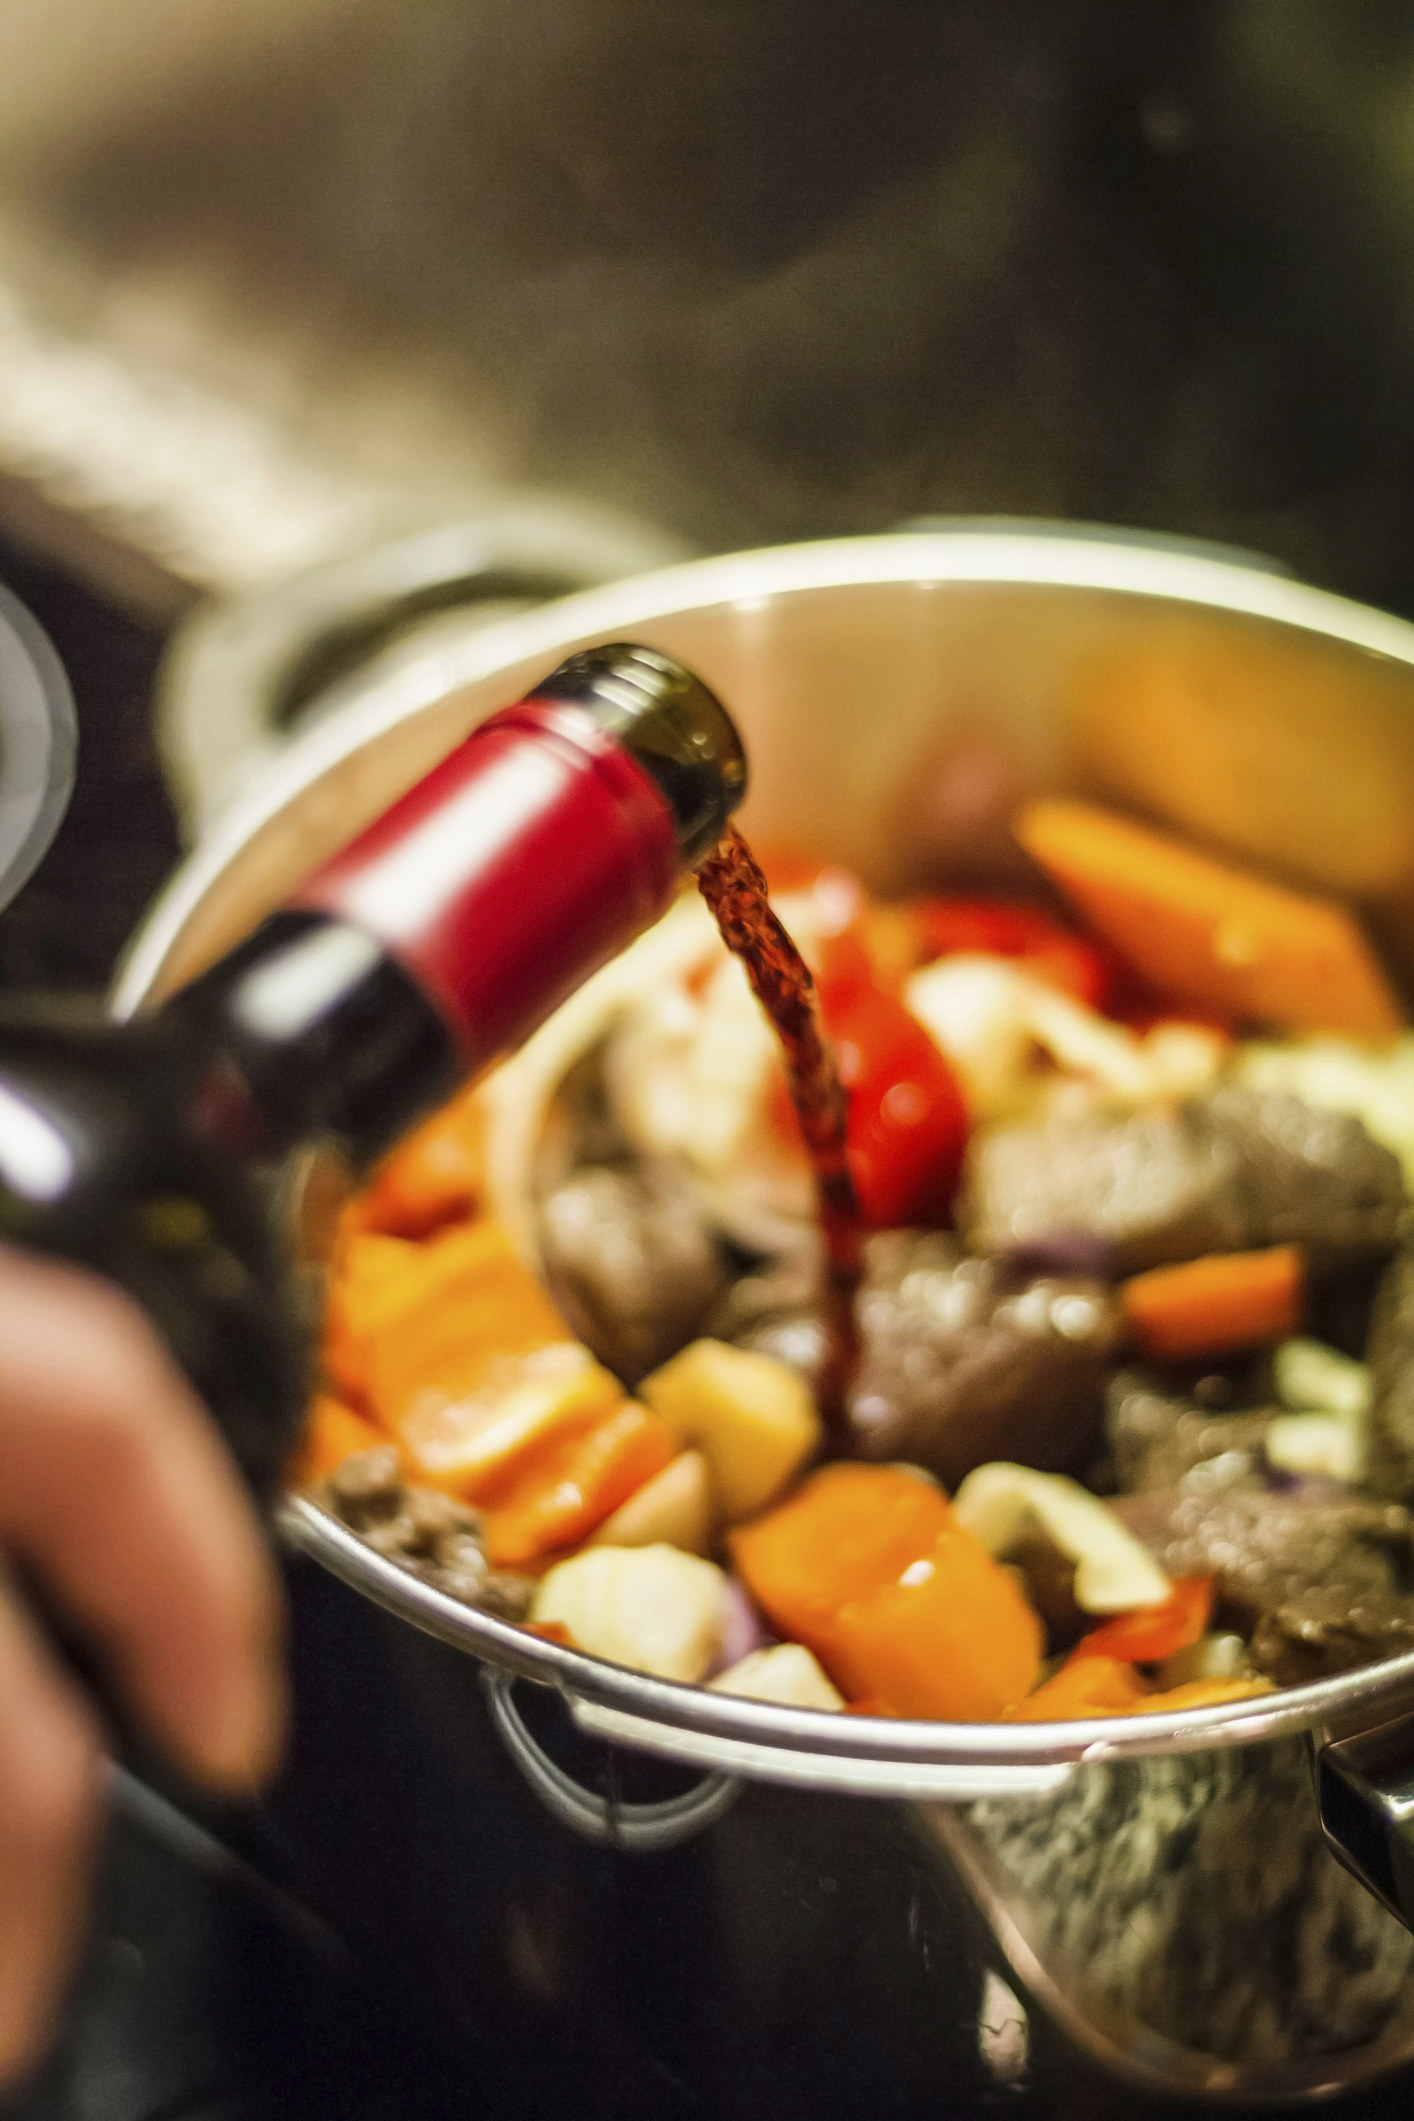 Wine being poured into a pot of vegetables